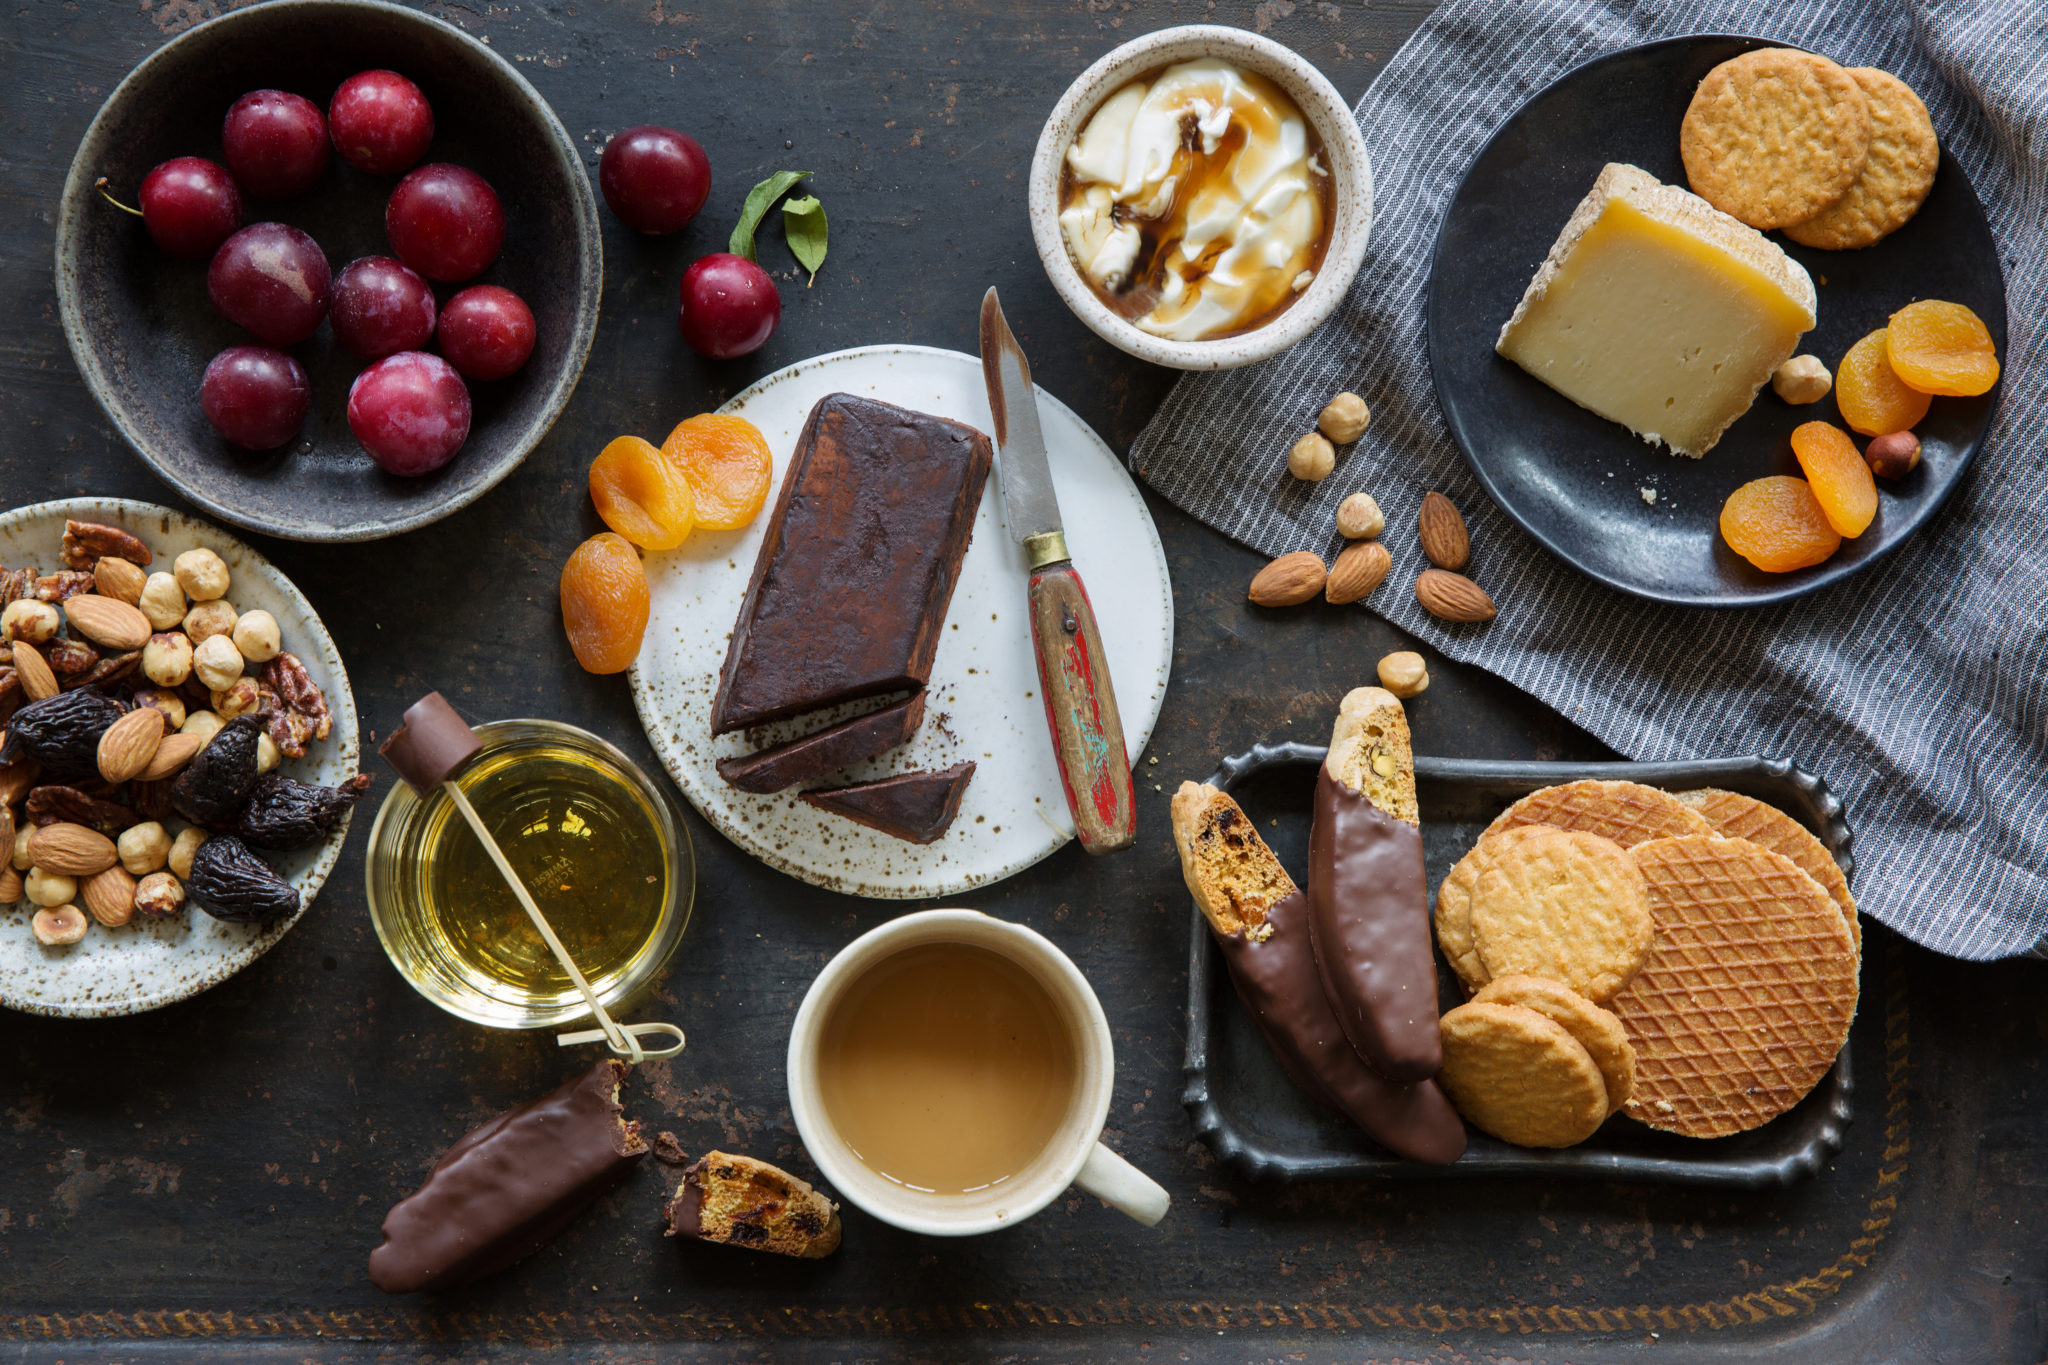 cheese and chocolate charcuterie with dried and fresh fruits